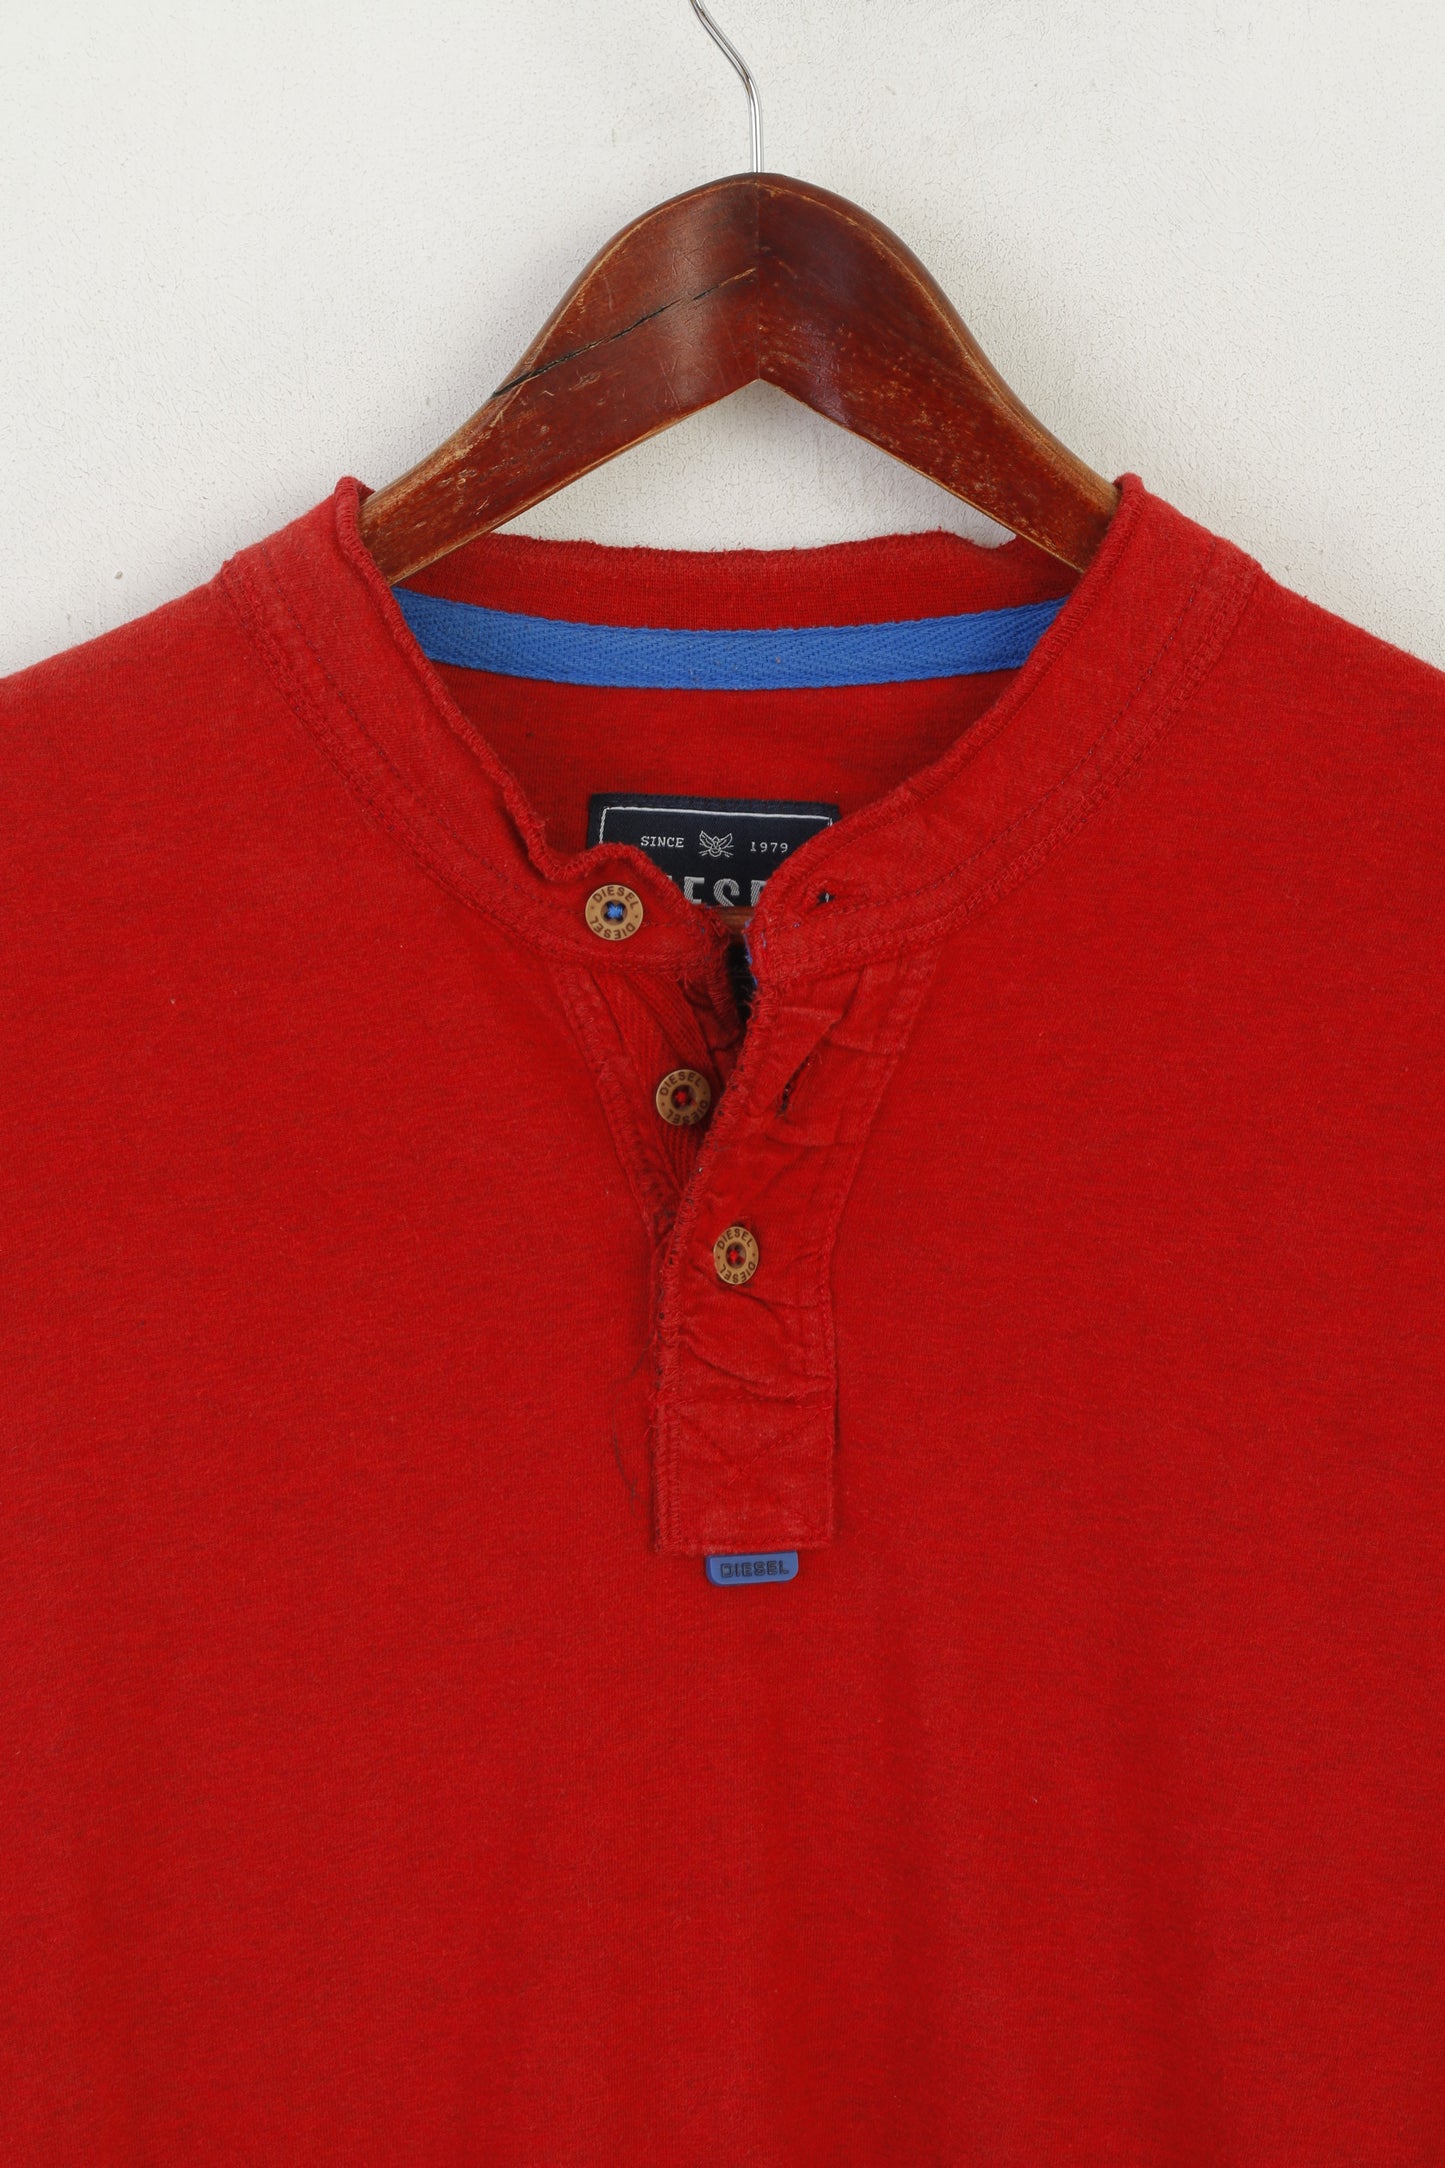 Diesel Men L Long Sleeved Shirt Red Cotton Button Neck Emroidered Sleeve Top